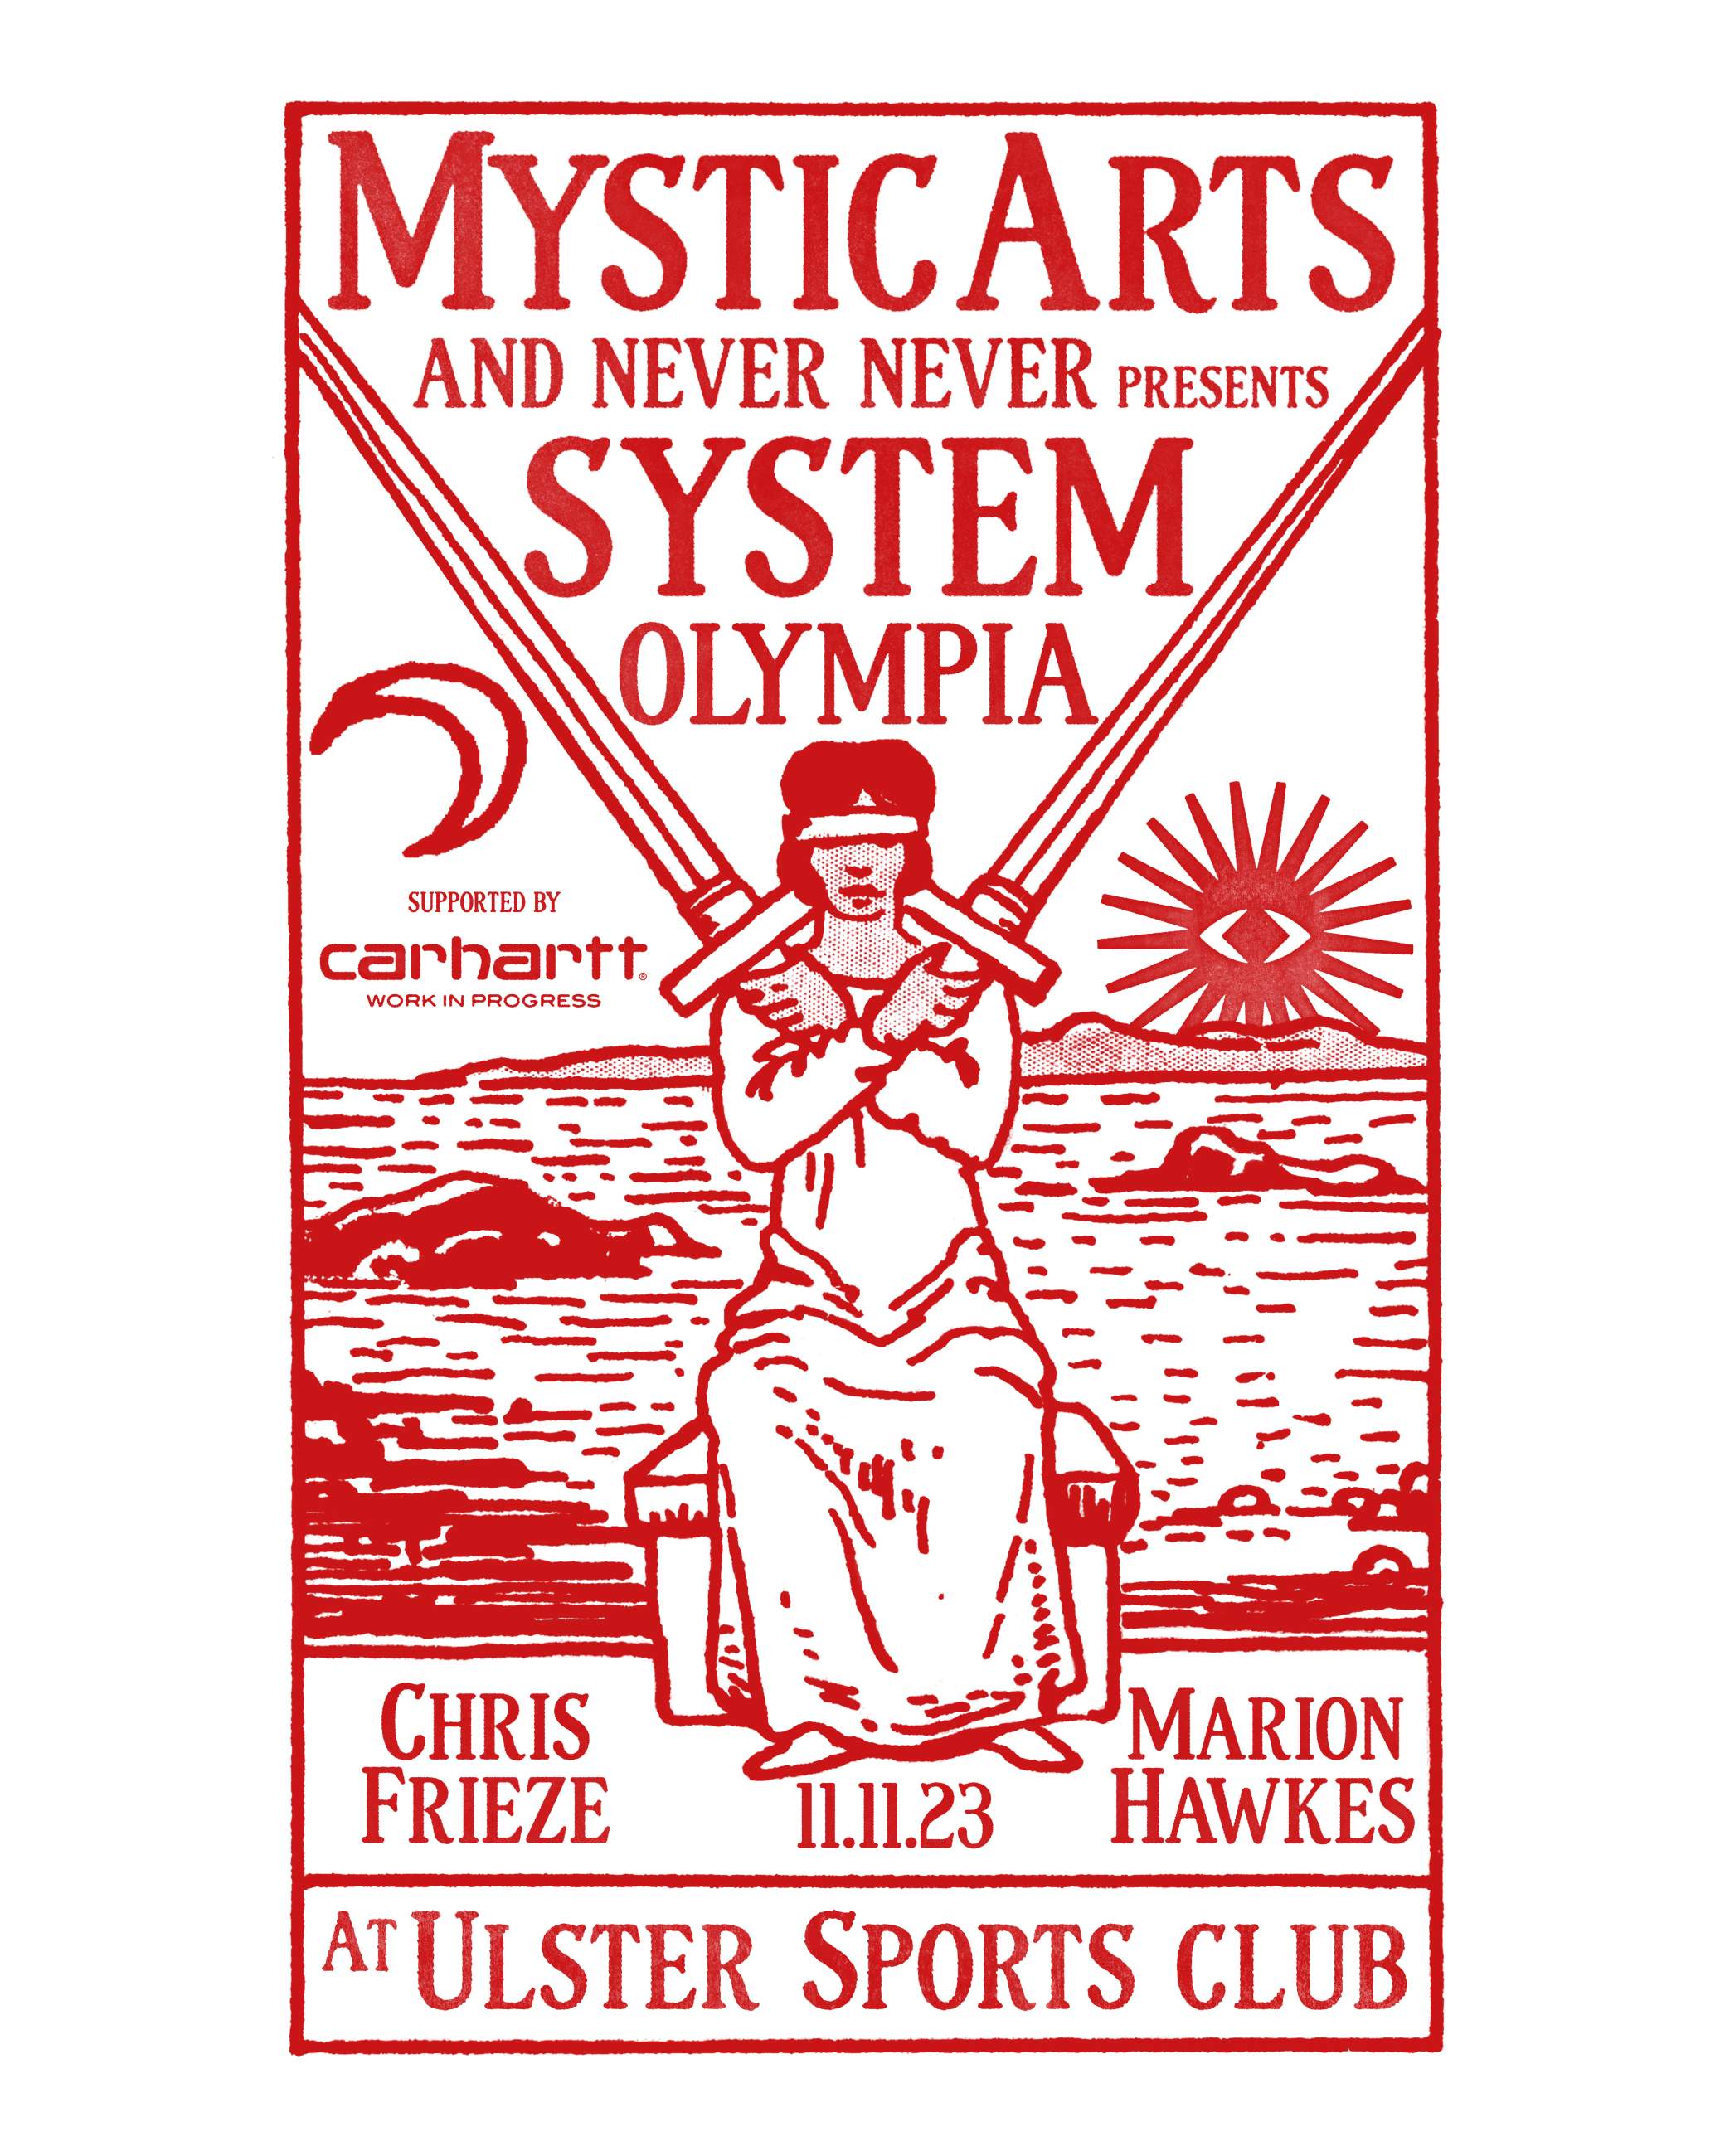 Mystic Arts & Never Never present System Olympia - フライヤー裏